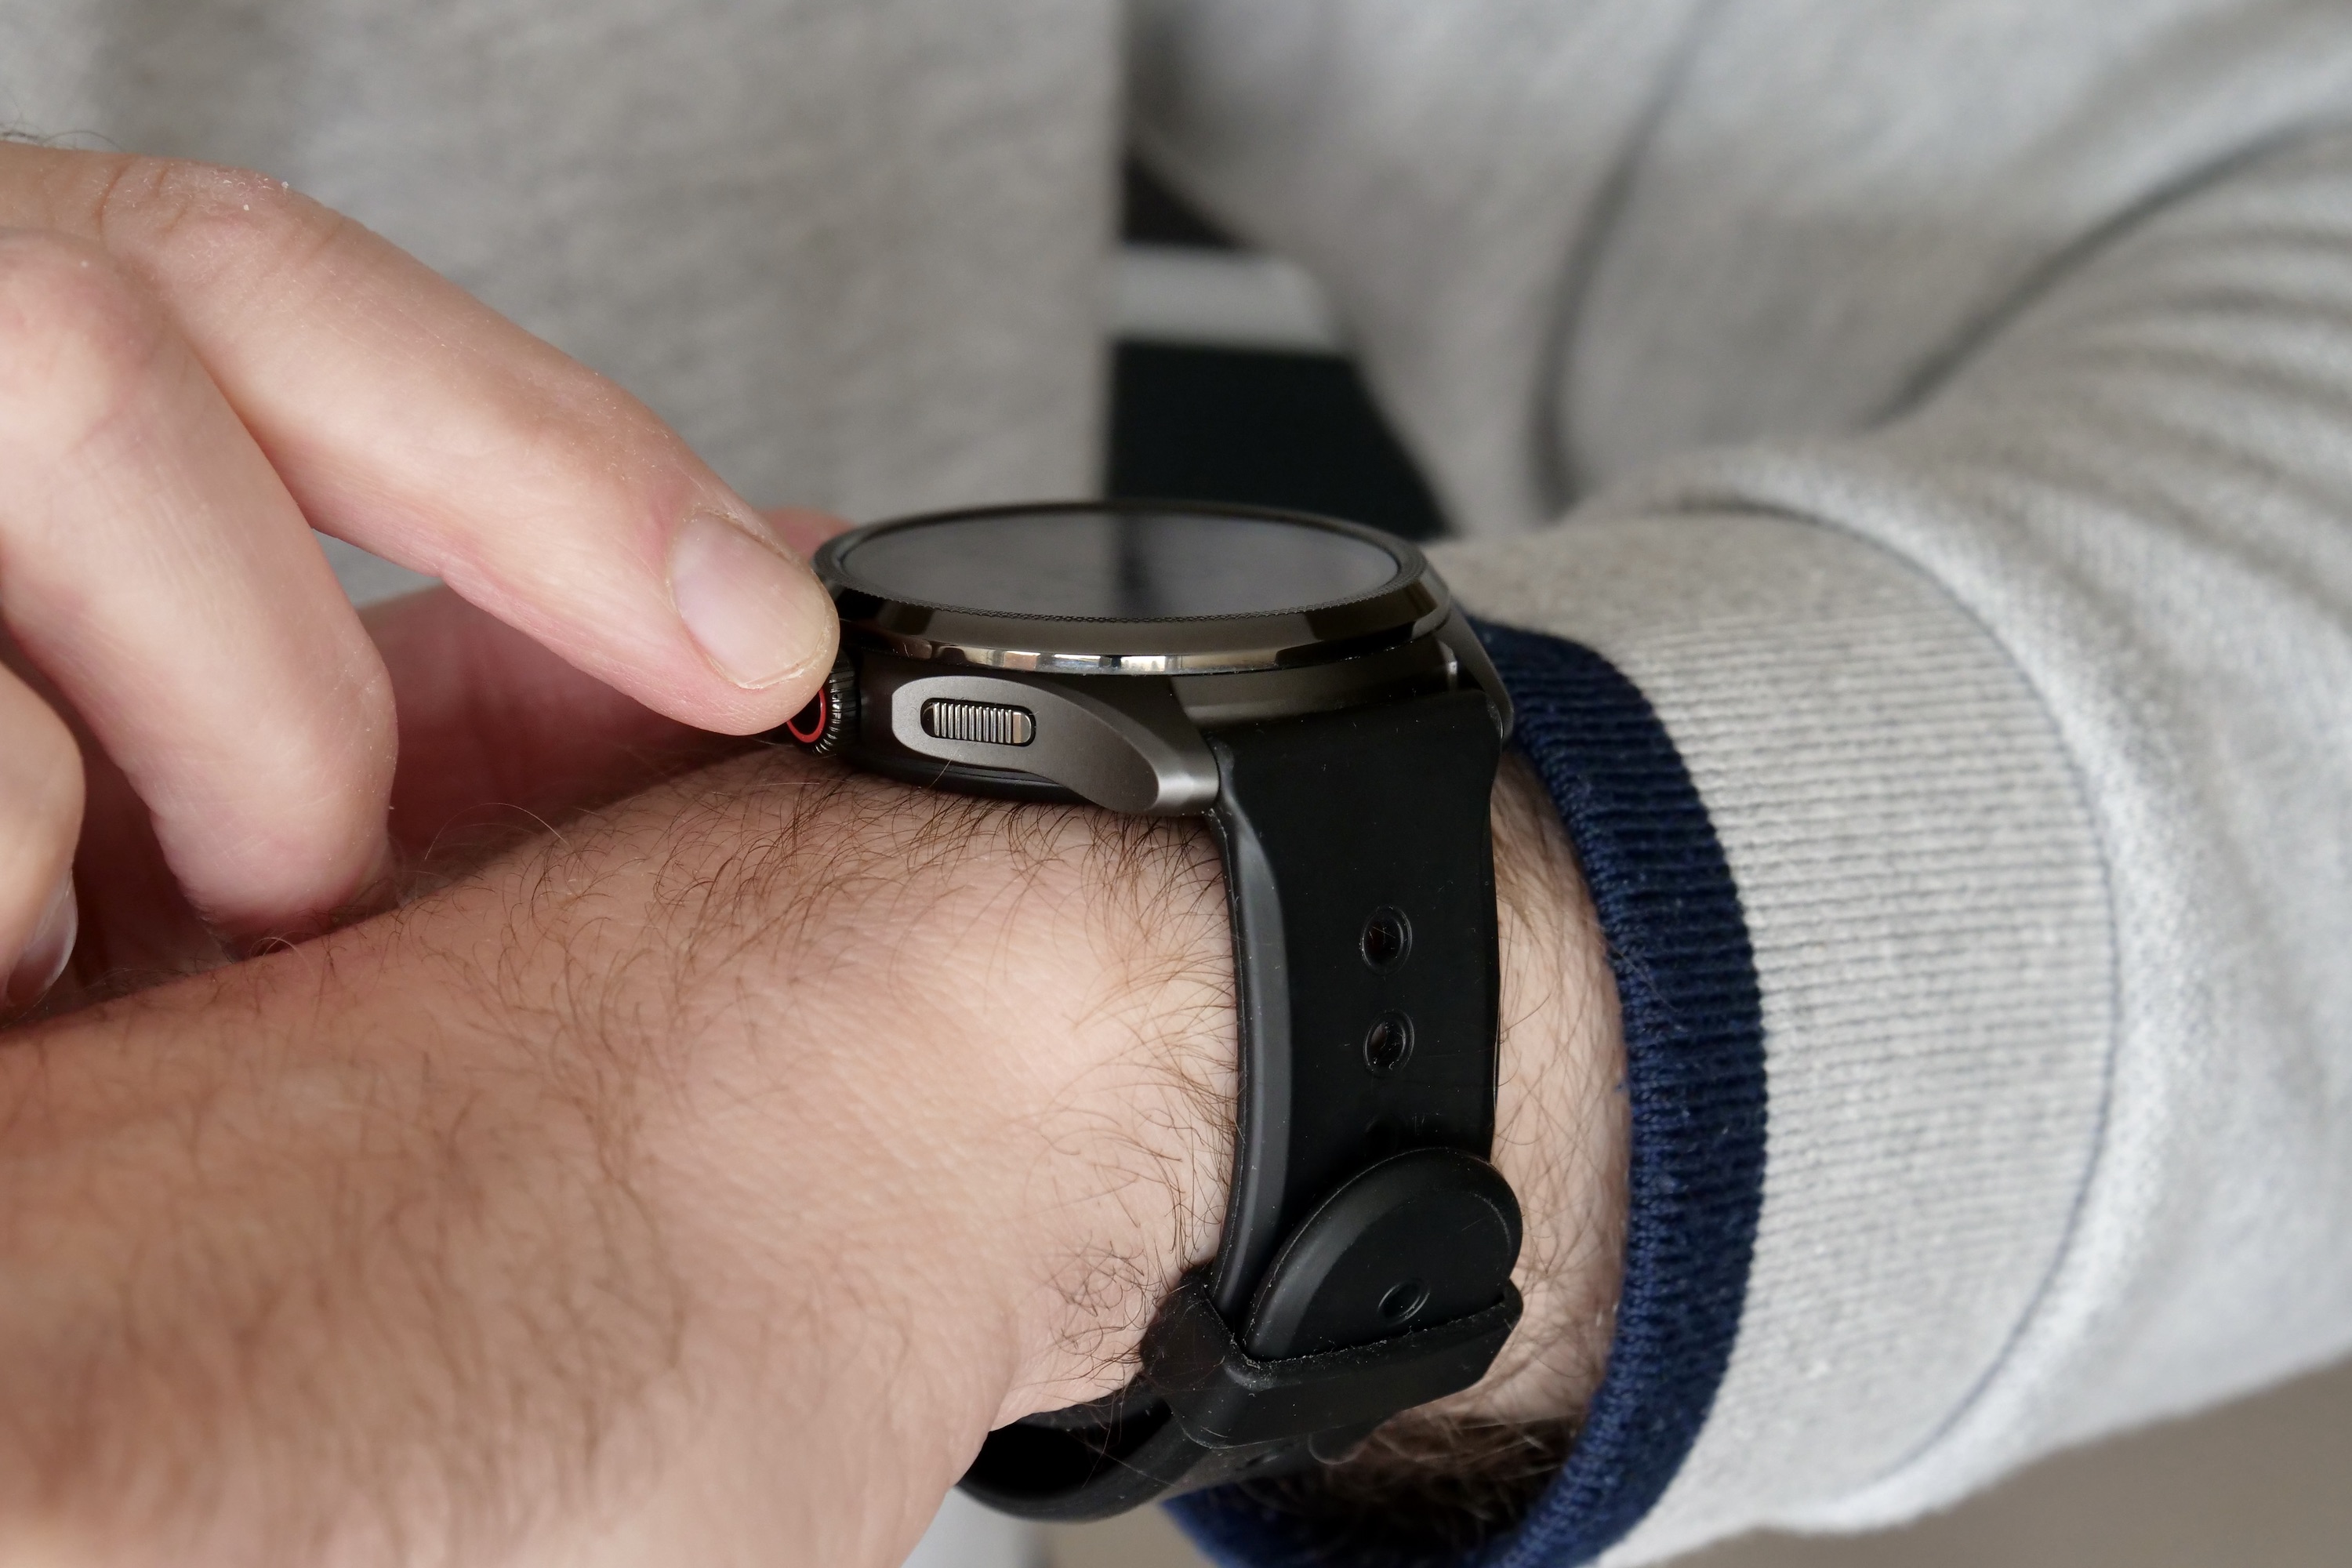 The Mobvoi TicWatch Pro 5 on a person's wrist, showing the side button.